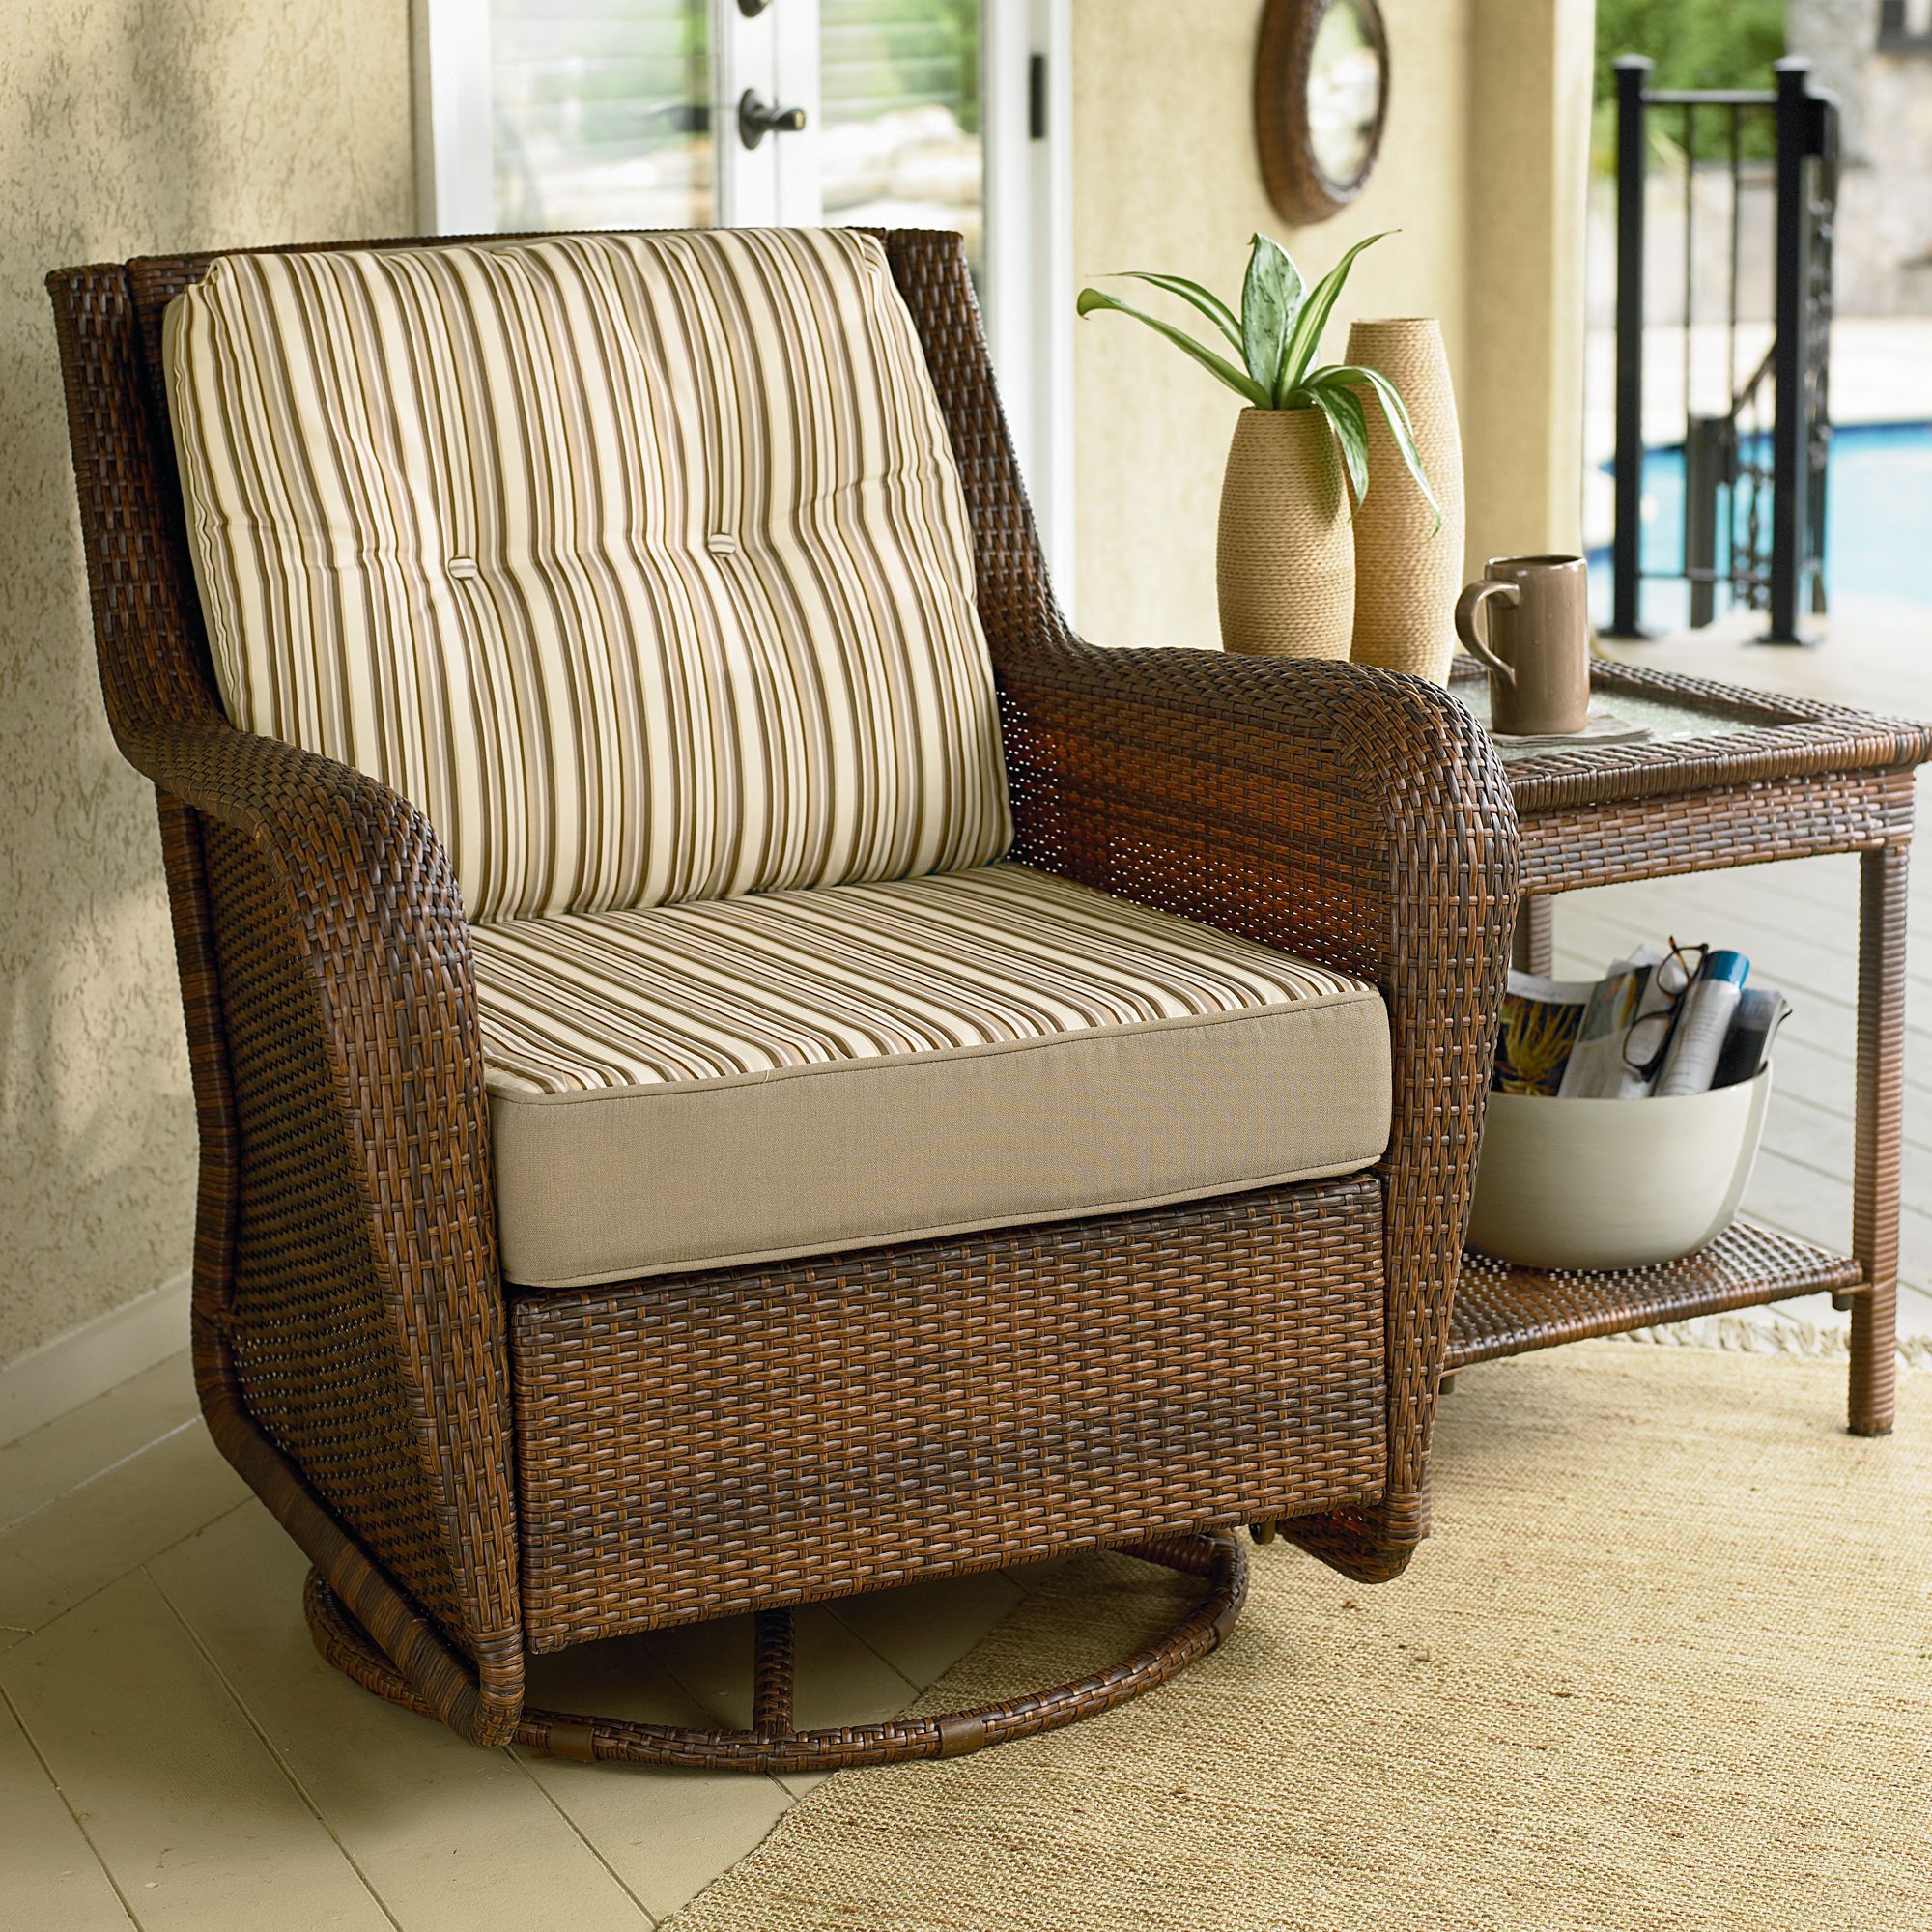 Swivel Glider Chair: Relax in Style with Classy Ideas from ...